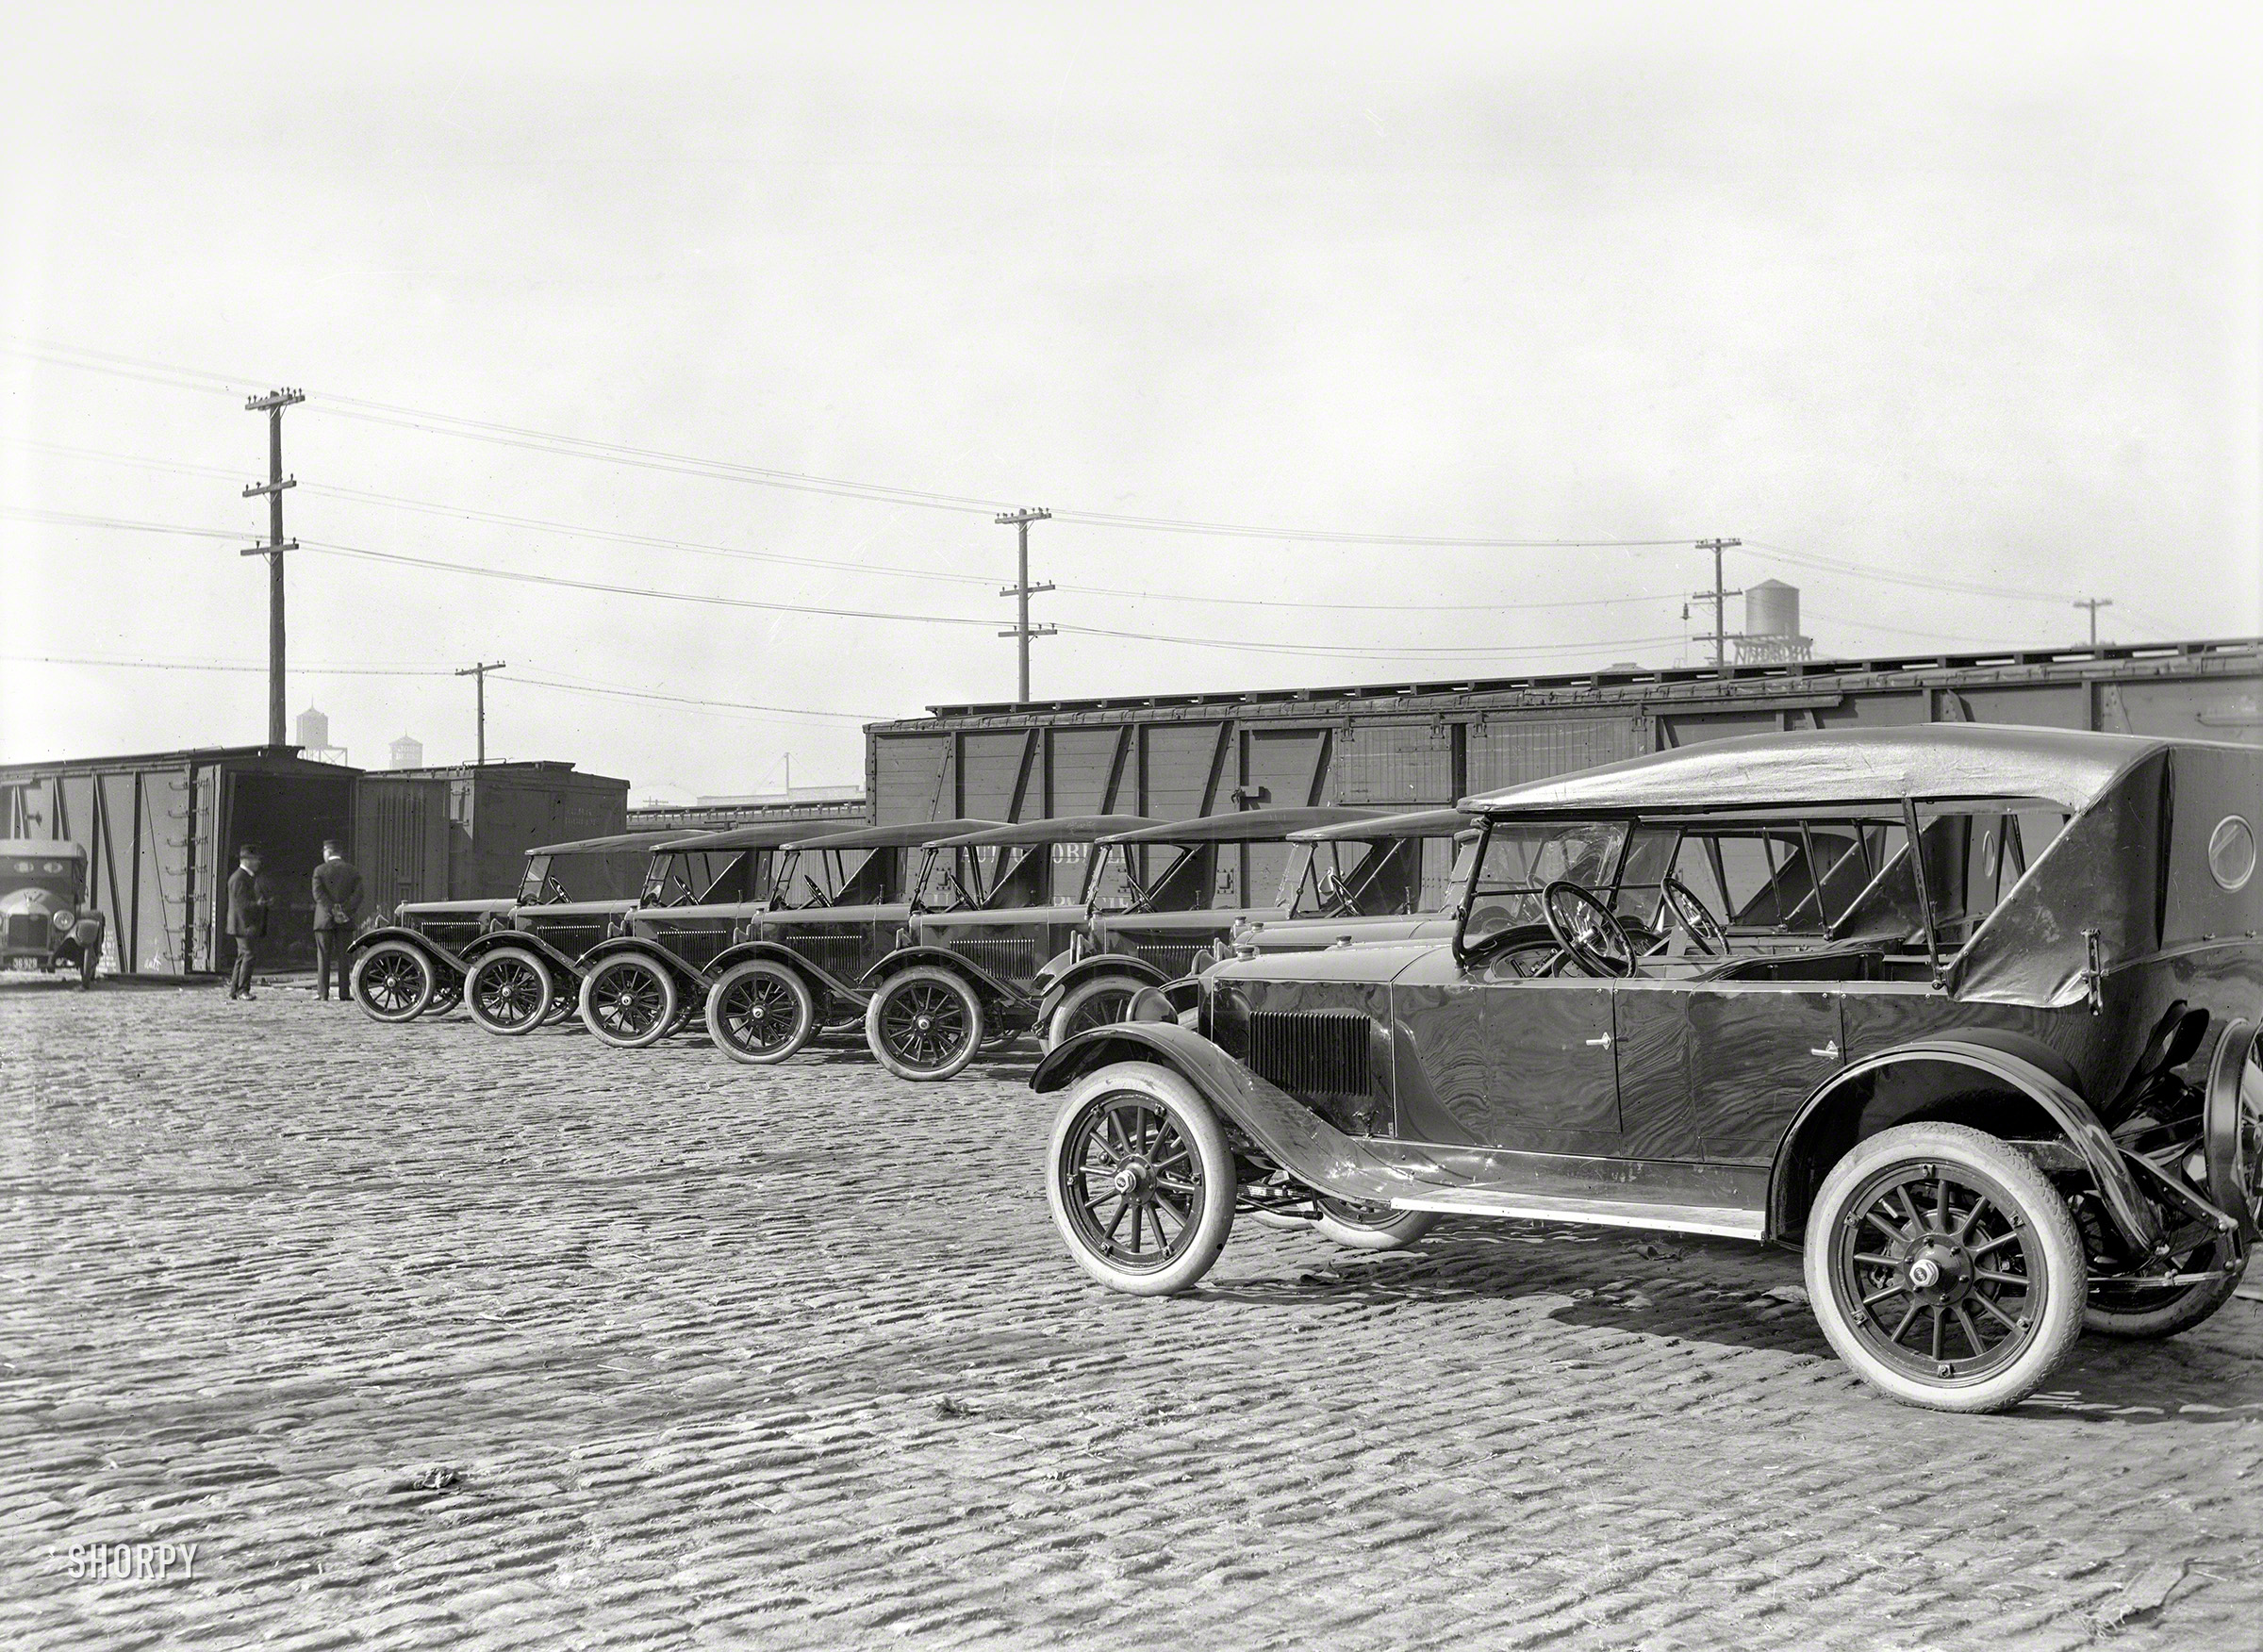 San Francisco circa 1920. "Grant Six touring cars after unloading." Latest tenants in the Shorpy Garage of Ill-Fated Phaetons. 5x7 glass negative. View full size.